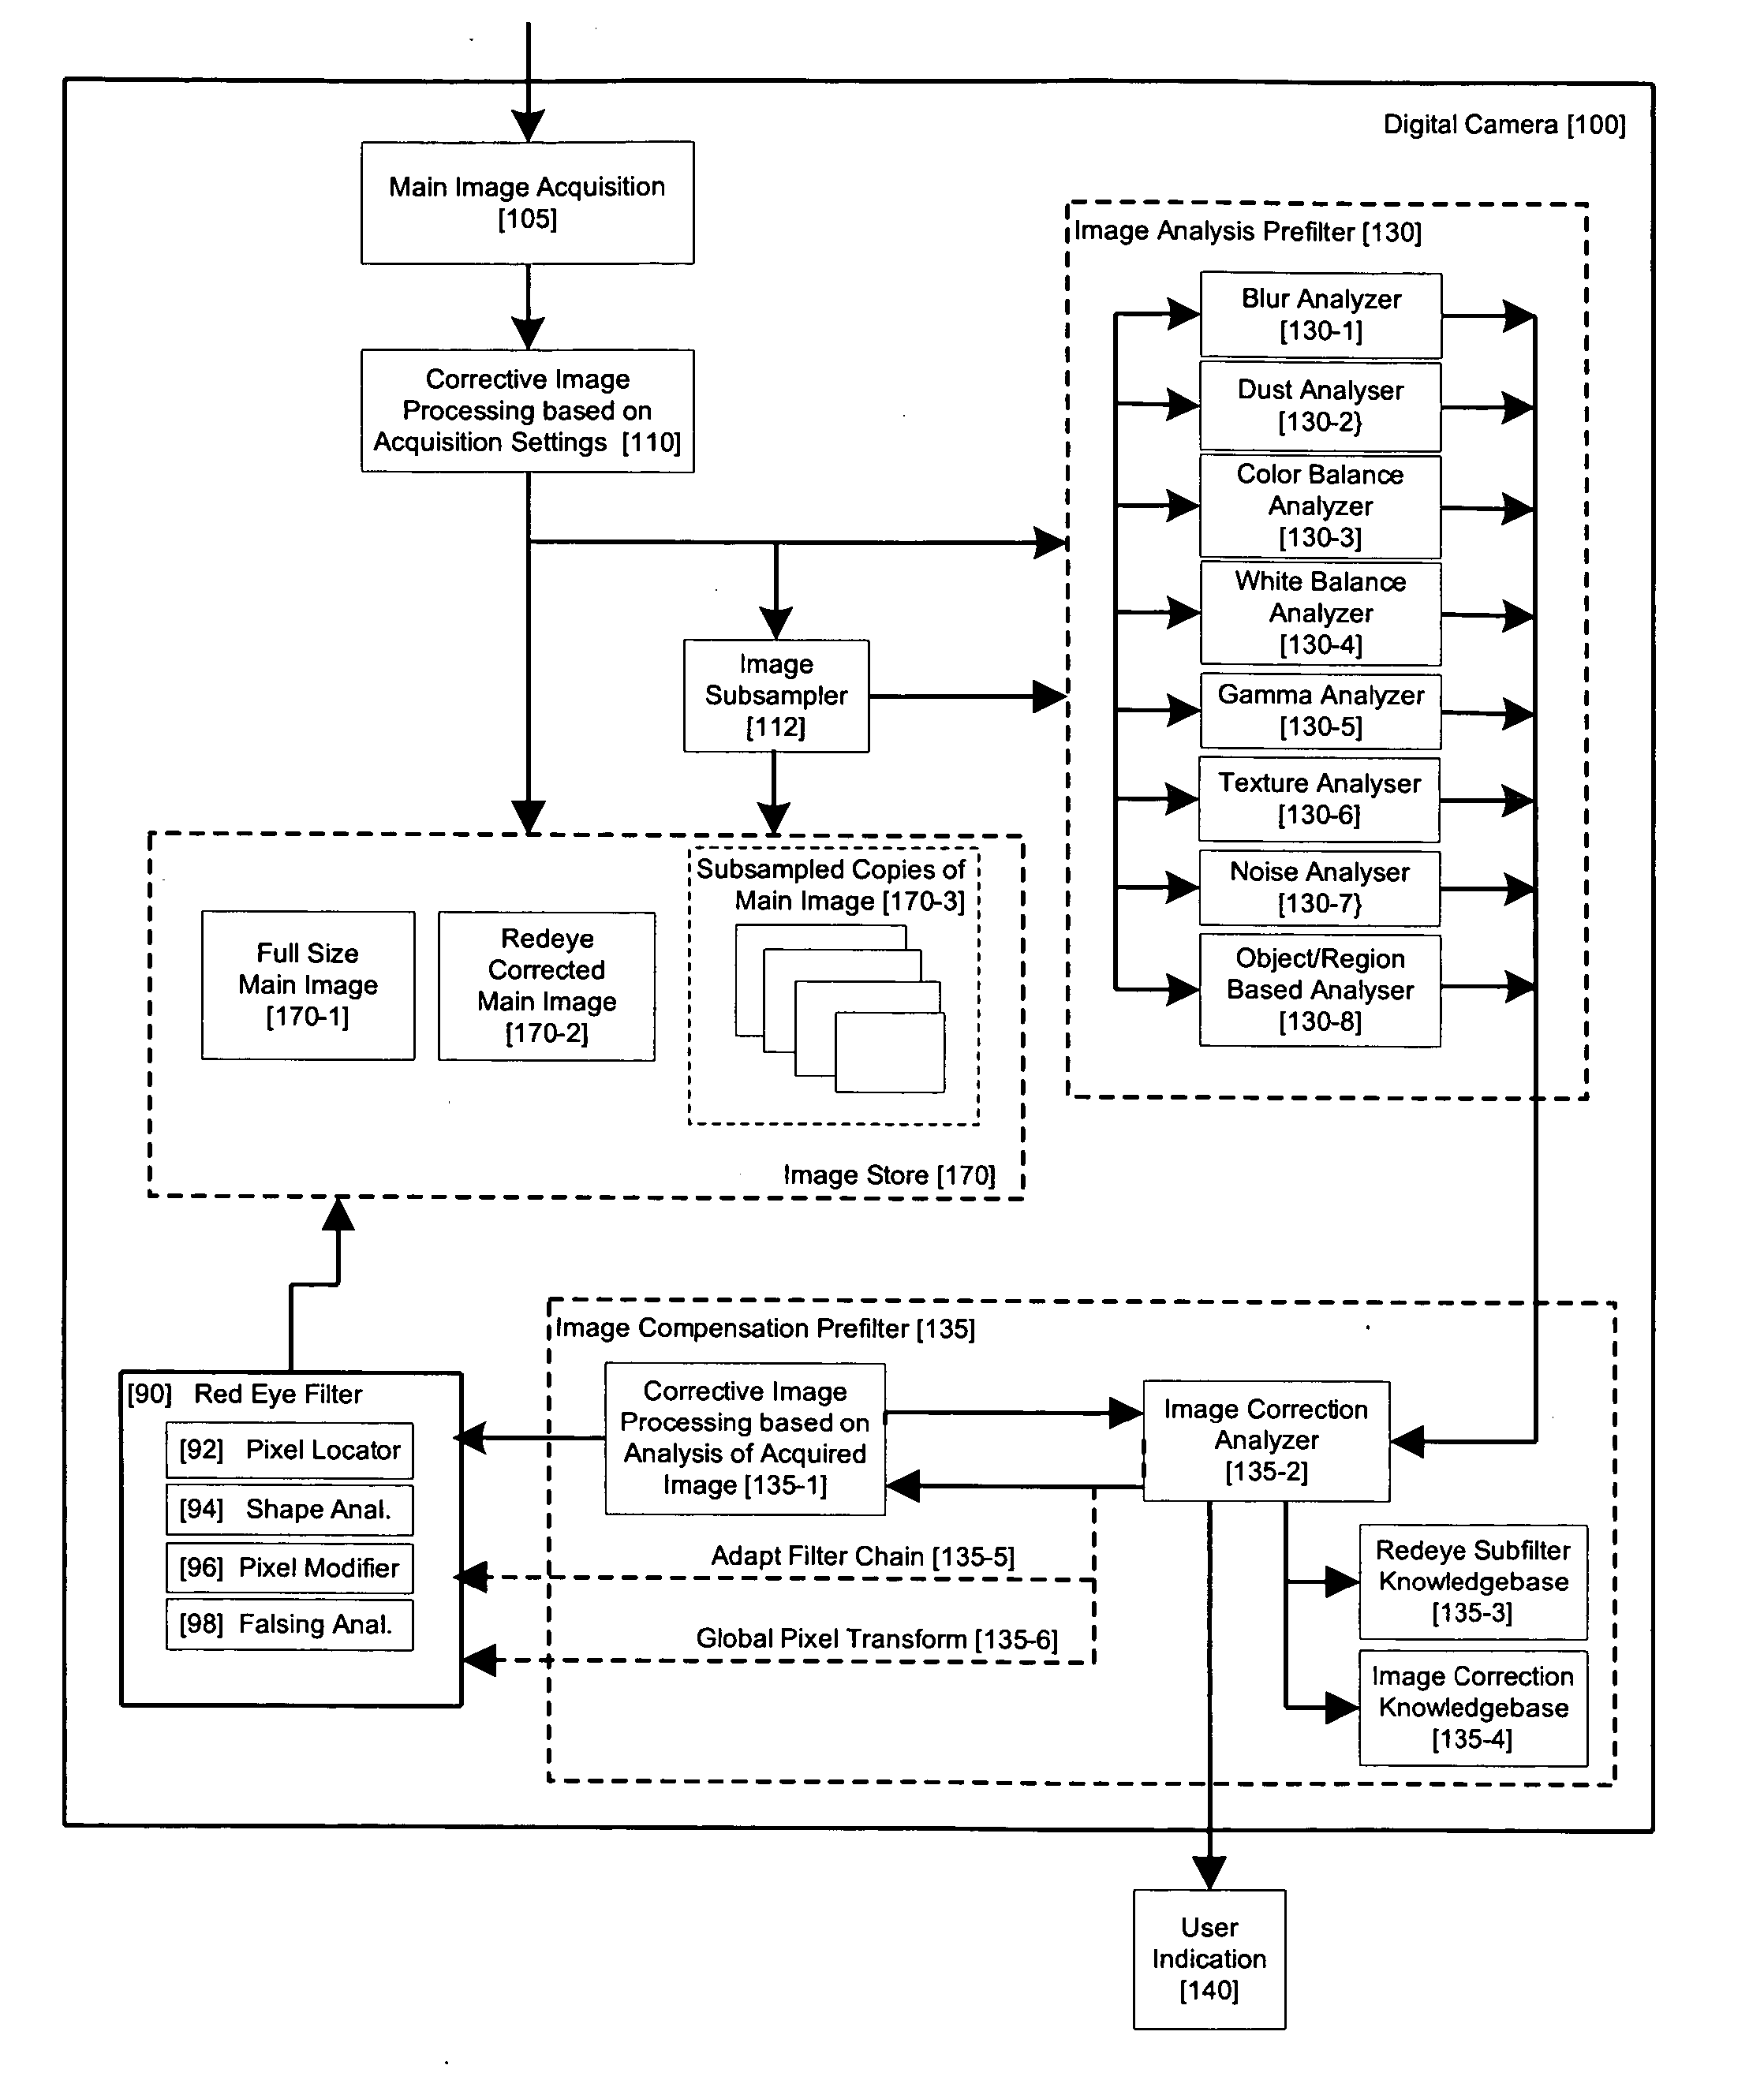 Method and apparatus for red-eye detection in an acquired digital image based on image quality pre and post filtering